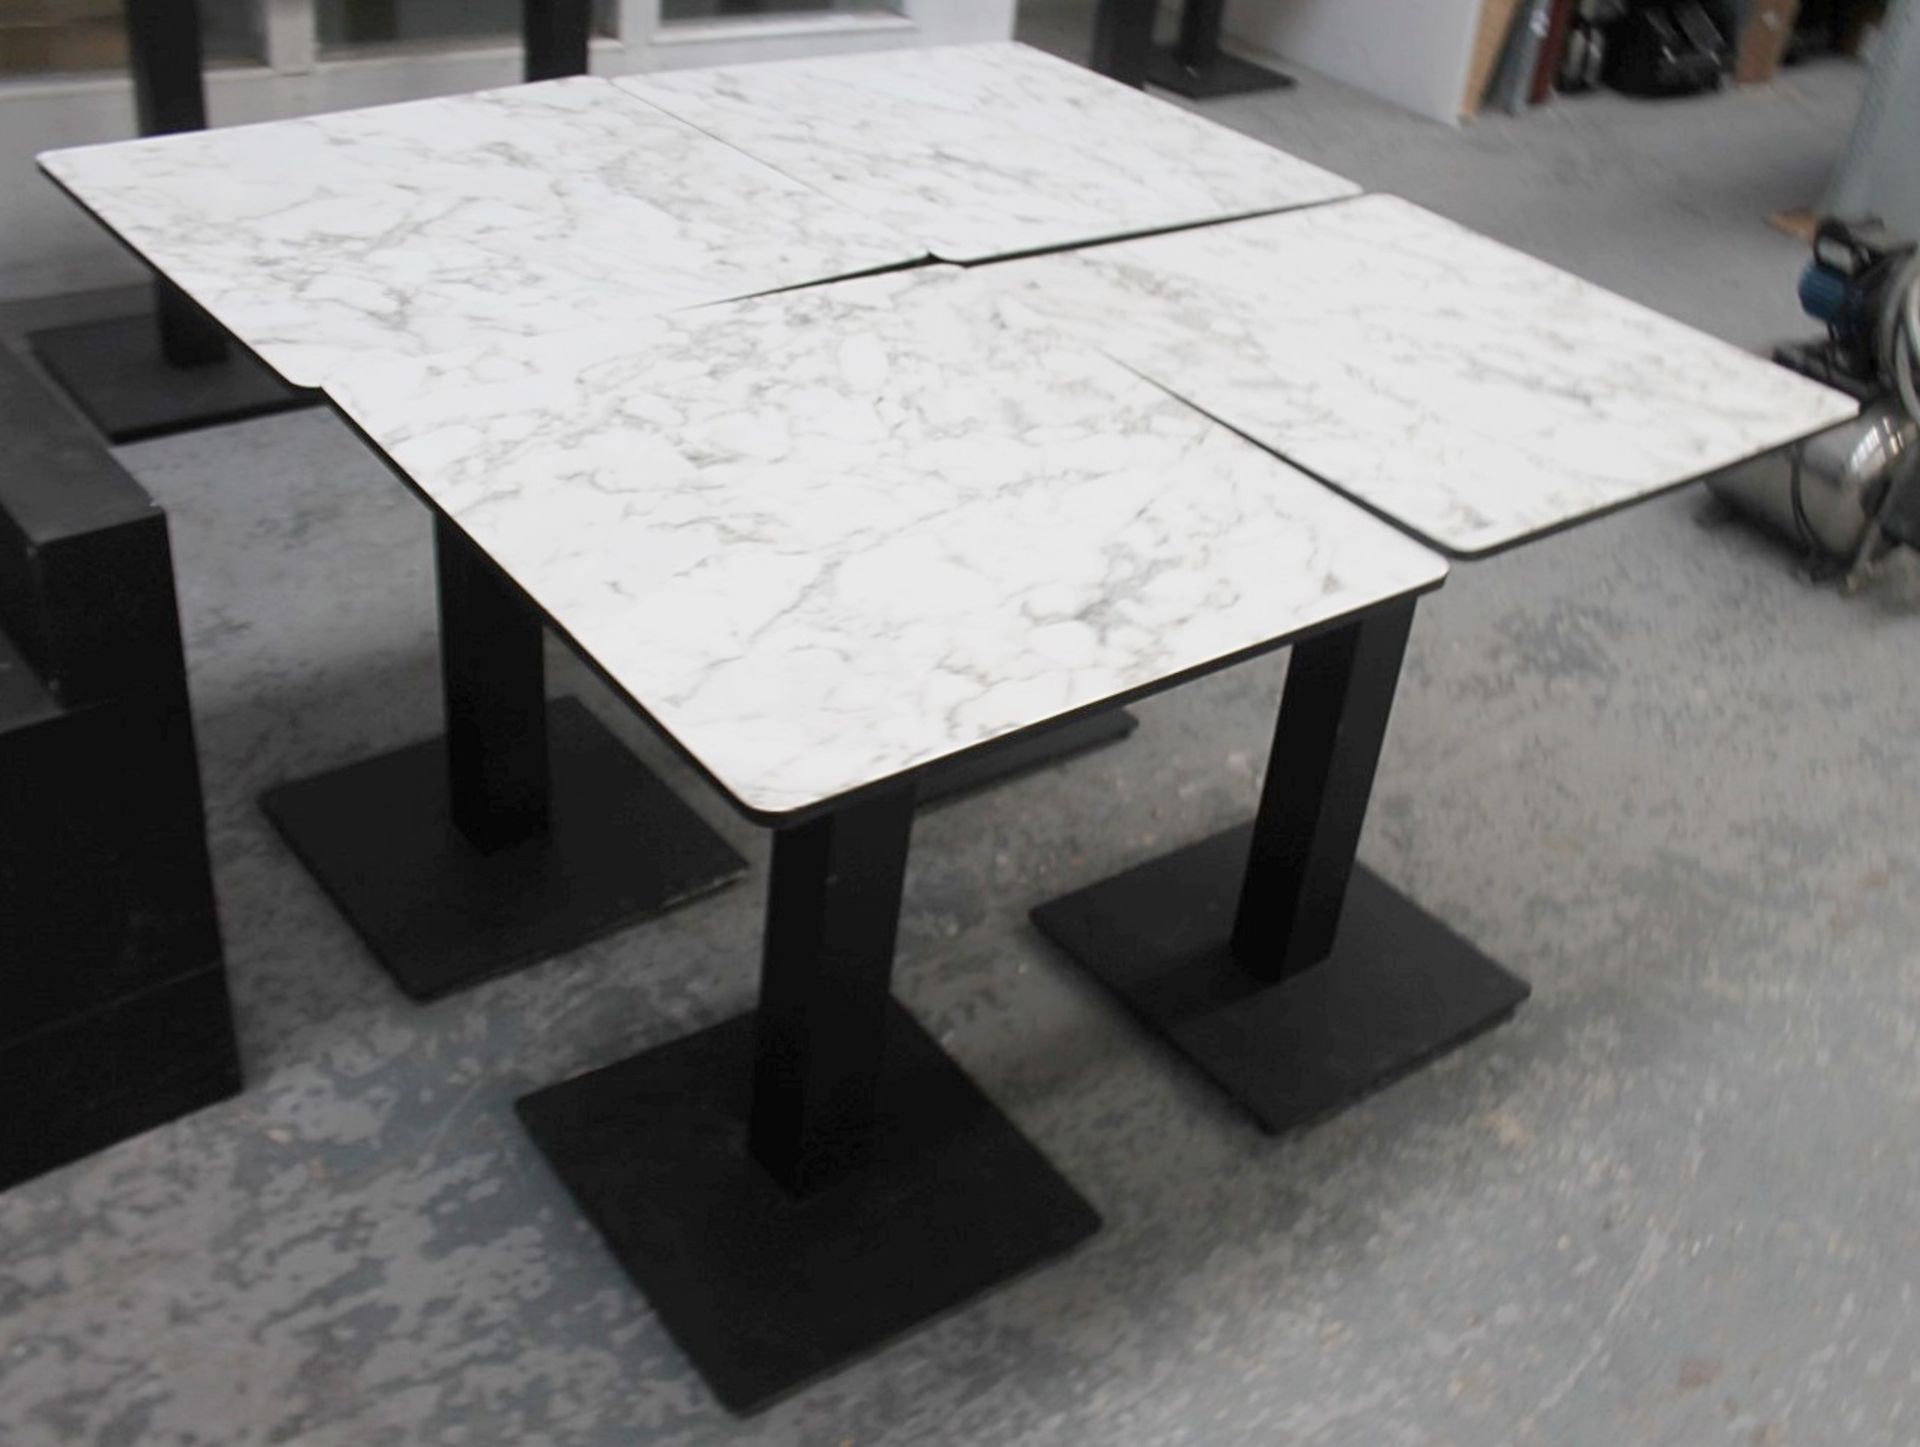 4 x Bistro Tables Featuring 'EXTREMA' Heavy-duty Tops With A White Marble-Style Finish, And Robust - Image 5 of 5